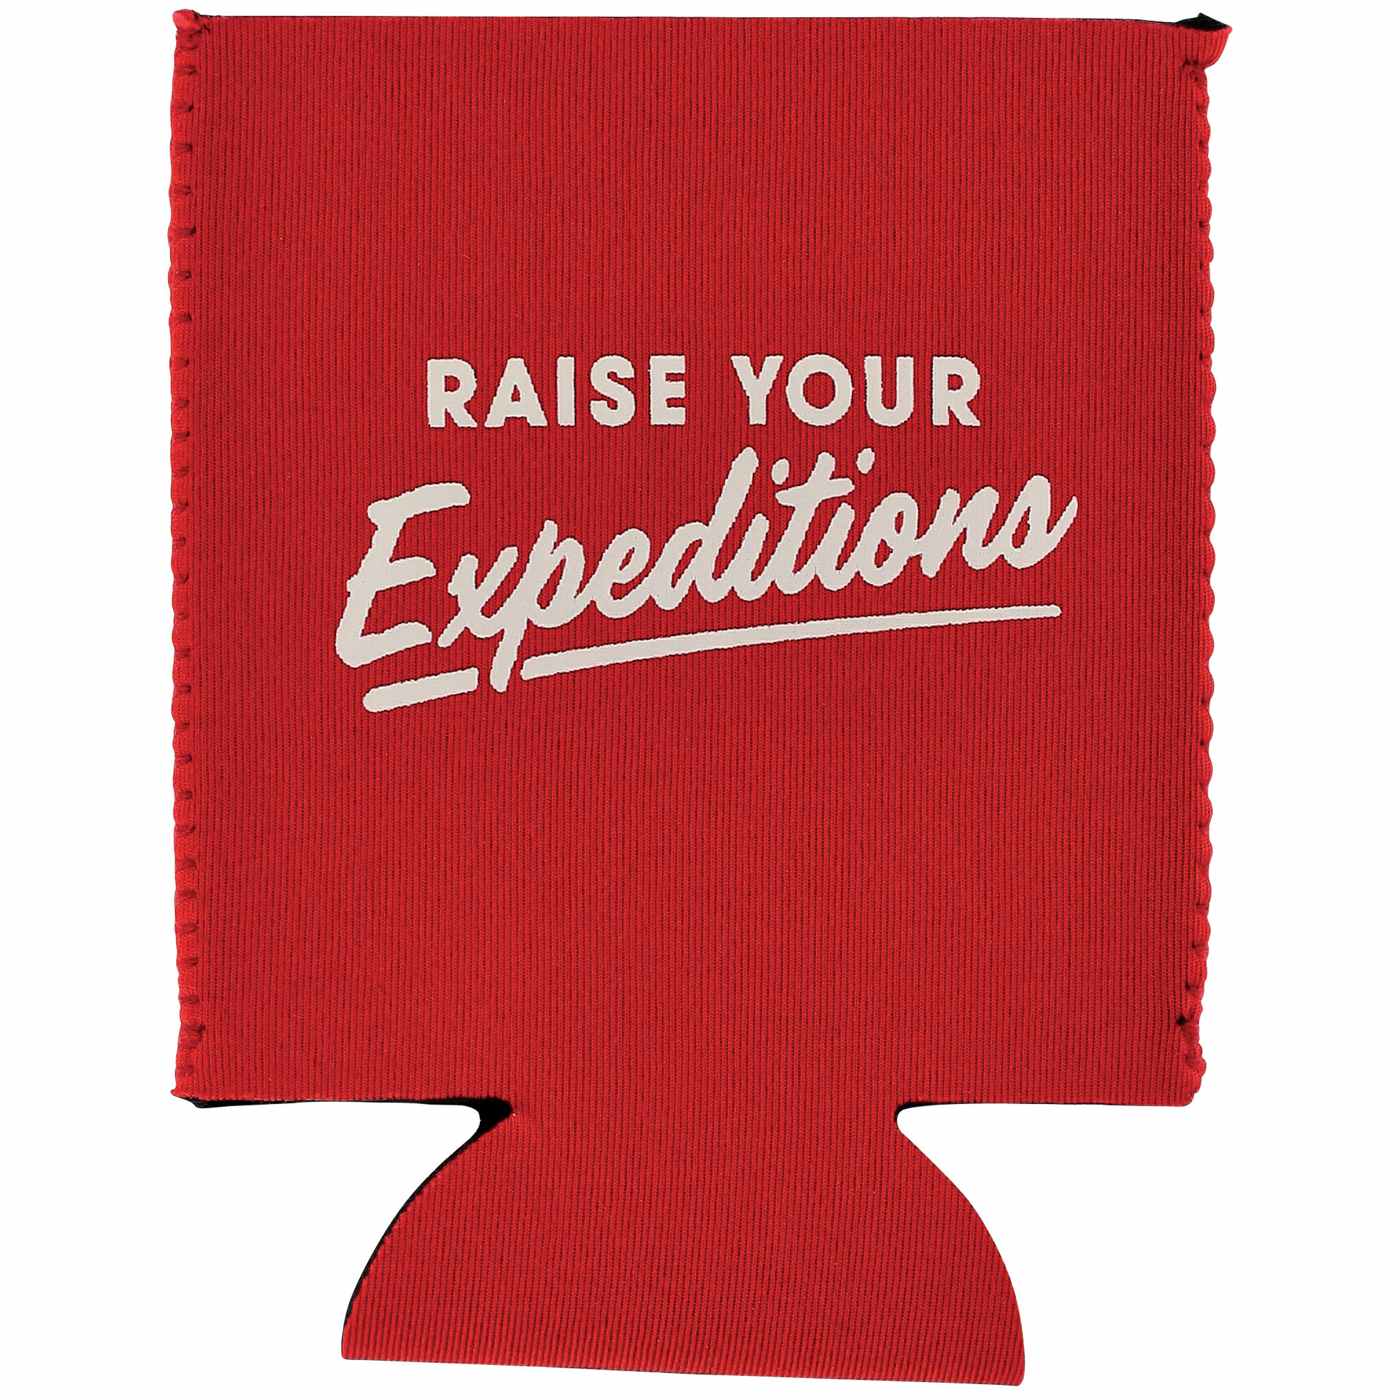 KODI by H-E-B Expeditions Regular Can Neoprene Insulator - Red; image 2 of 2